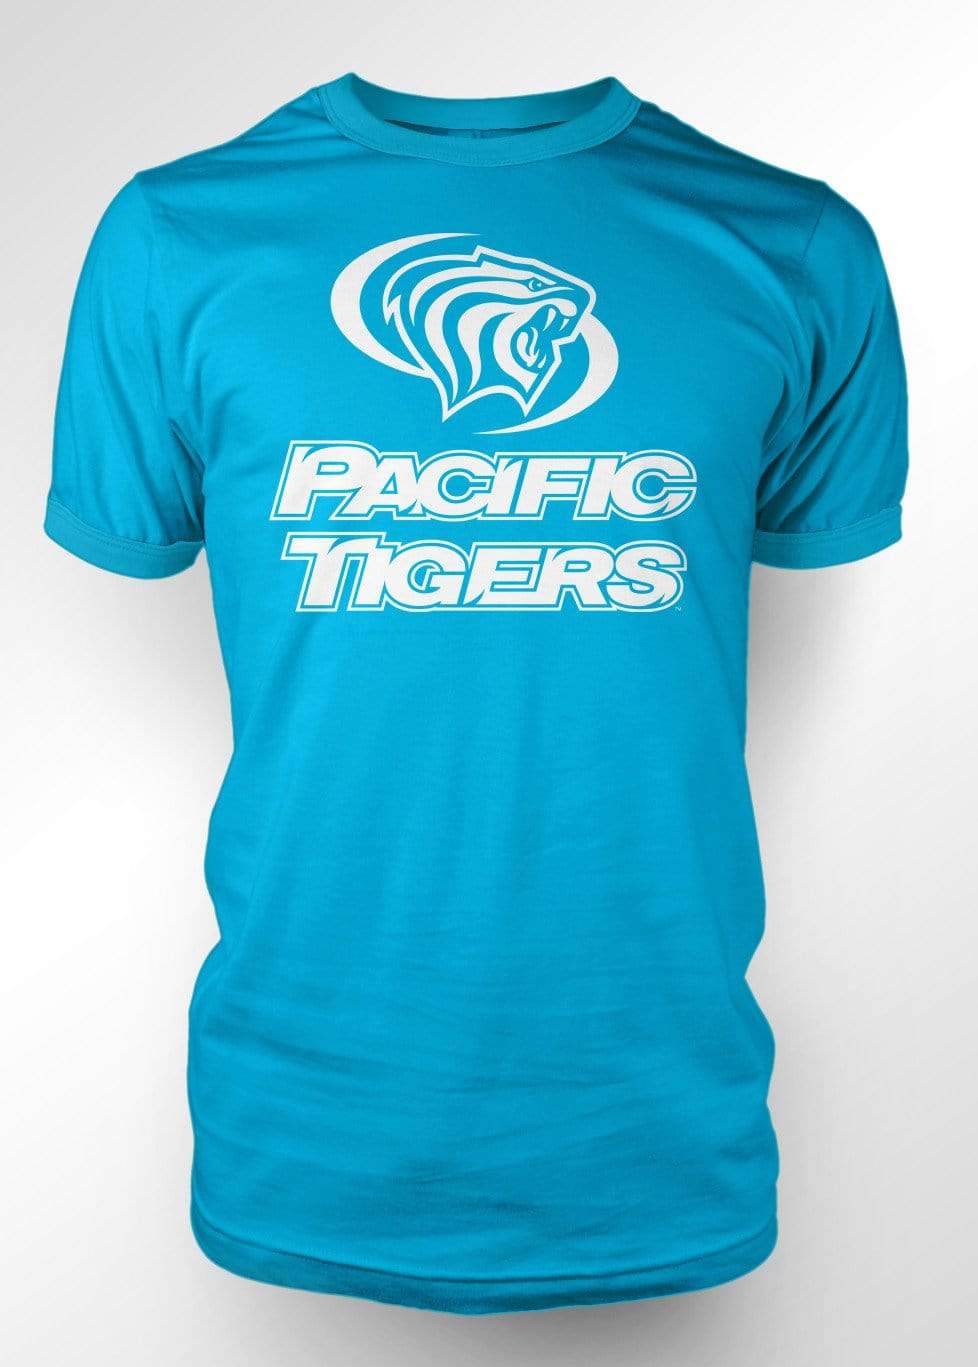 University of the Pacific Tigers Classic Series T-Shirt by Zeus Collegiate